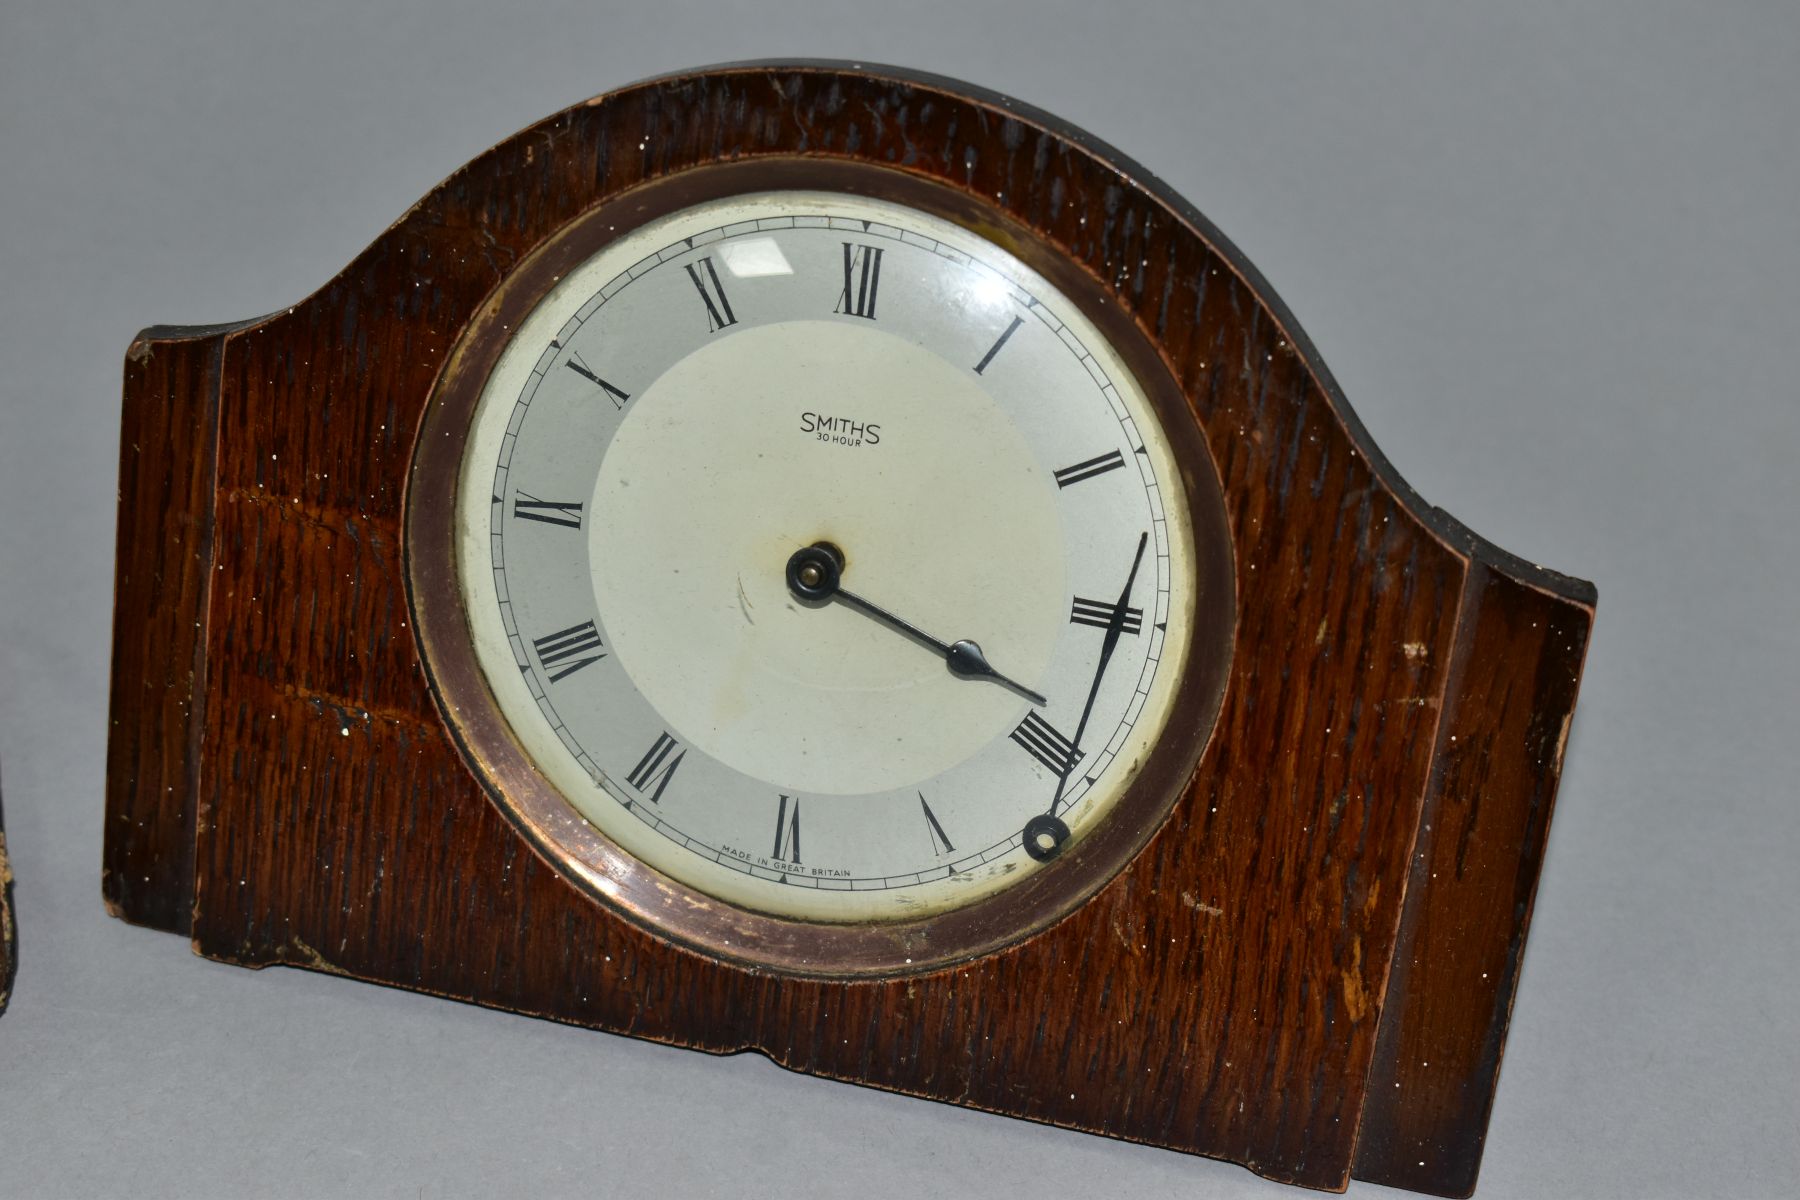 AN EARLY 20TH CENTURY ASPREY 8 DAY TRAVEL CLOCK, in a damaged leather folding case, incomplete, - Image 2 of 5